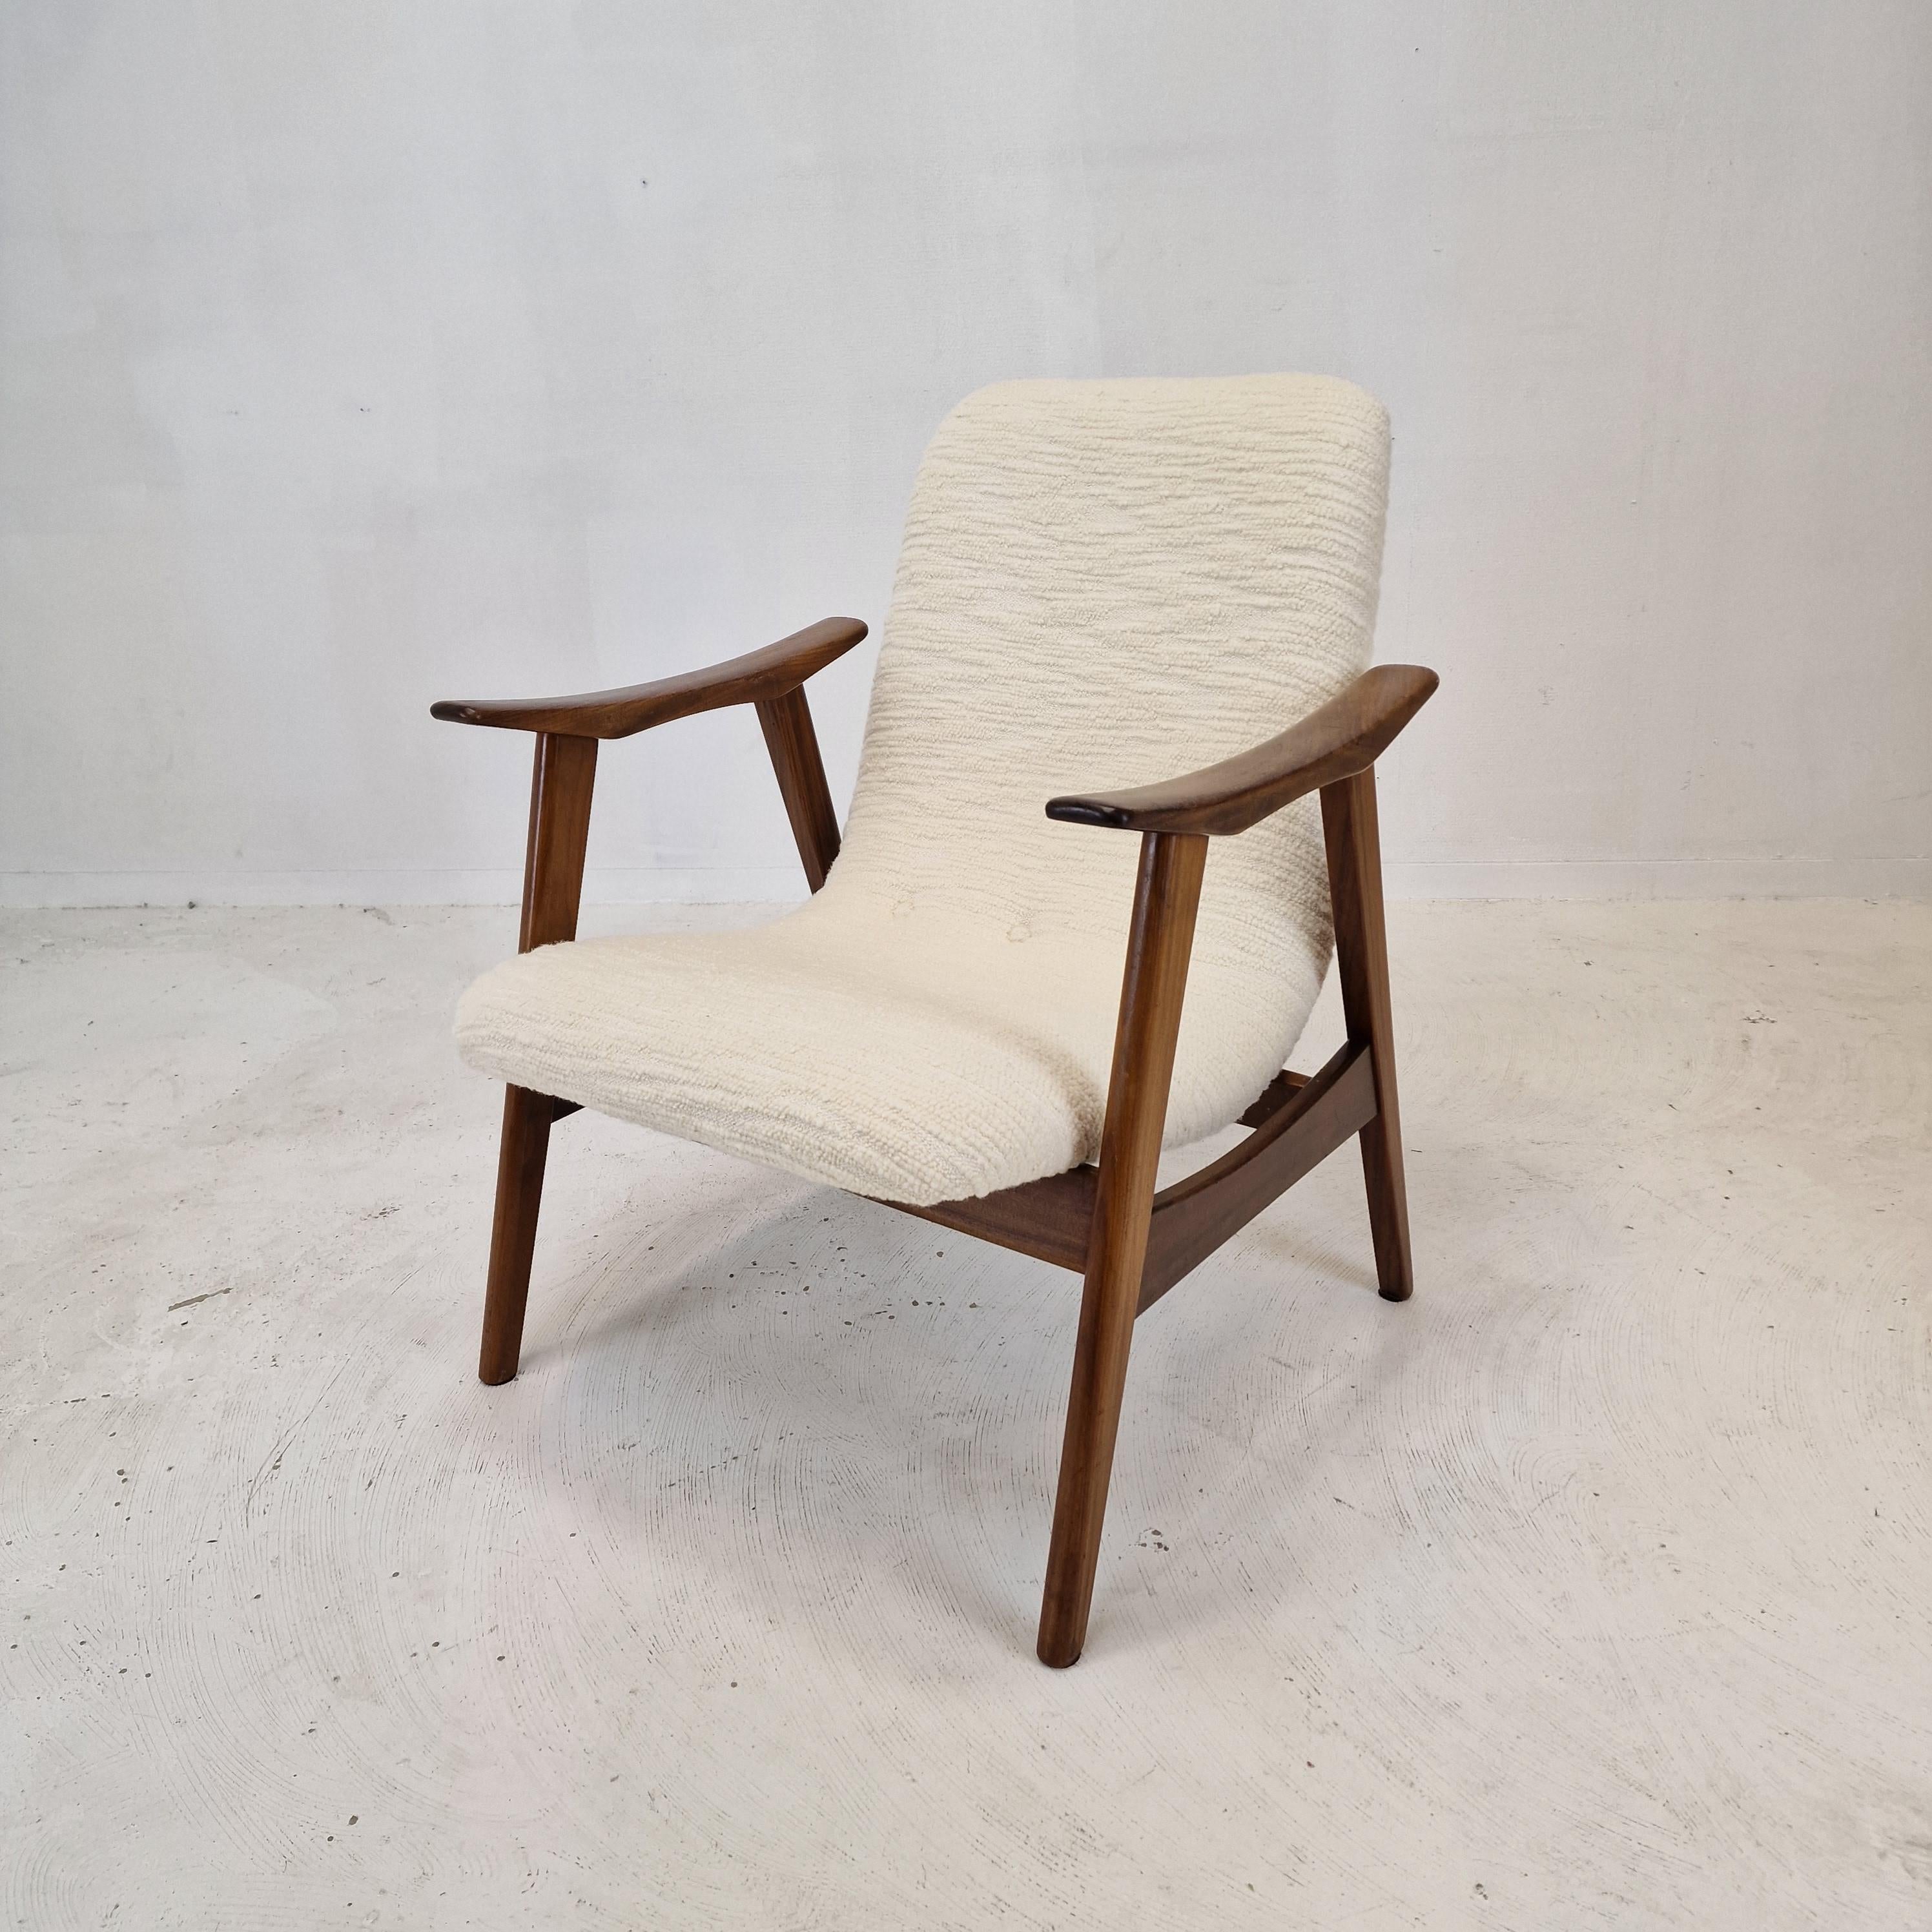 Lovely lounge chair, fabricated in the 60's by Wébé the Netherlands.
It is designed by Louis van Teeffelen.

The elegant structure of this comfortable chairs is made of solid teak.

The chair is just restored with new foam and new fabric.
It